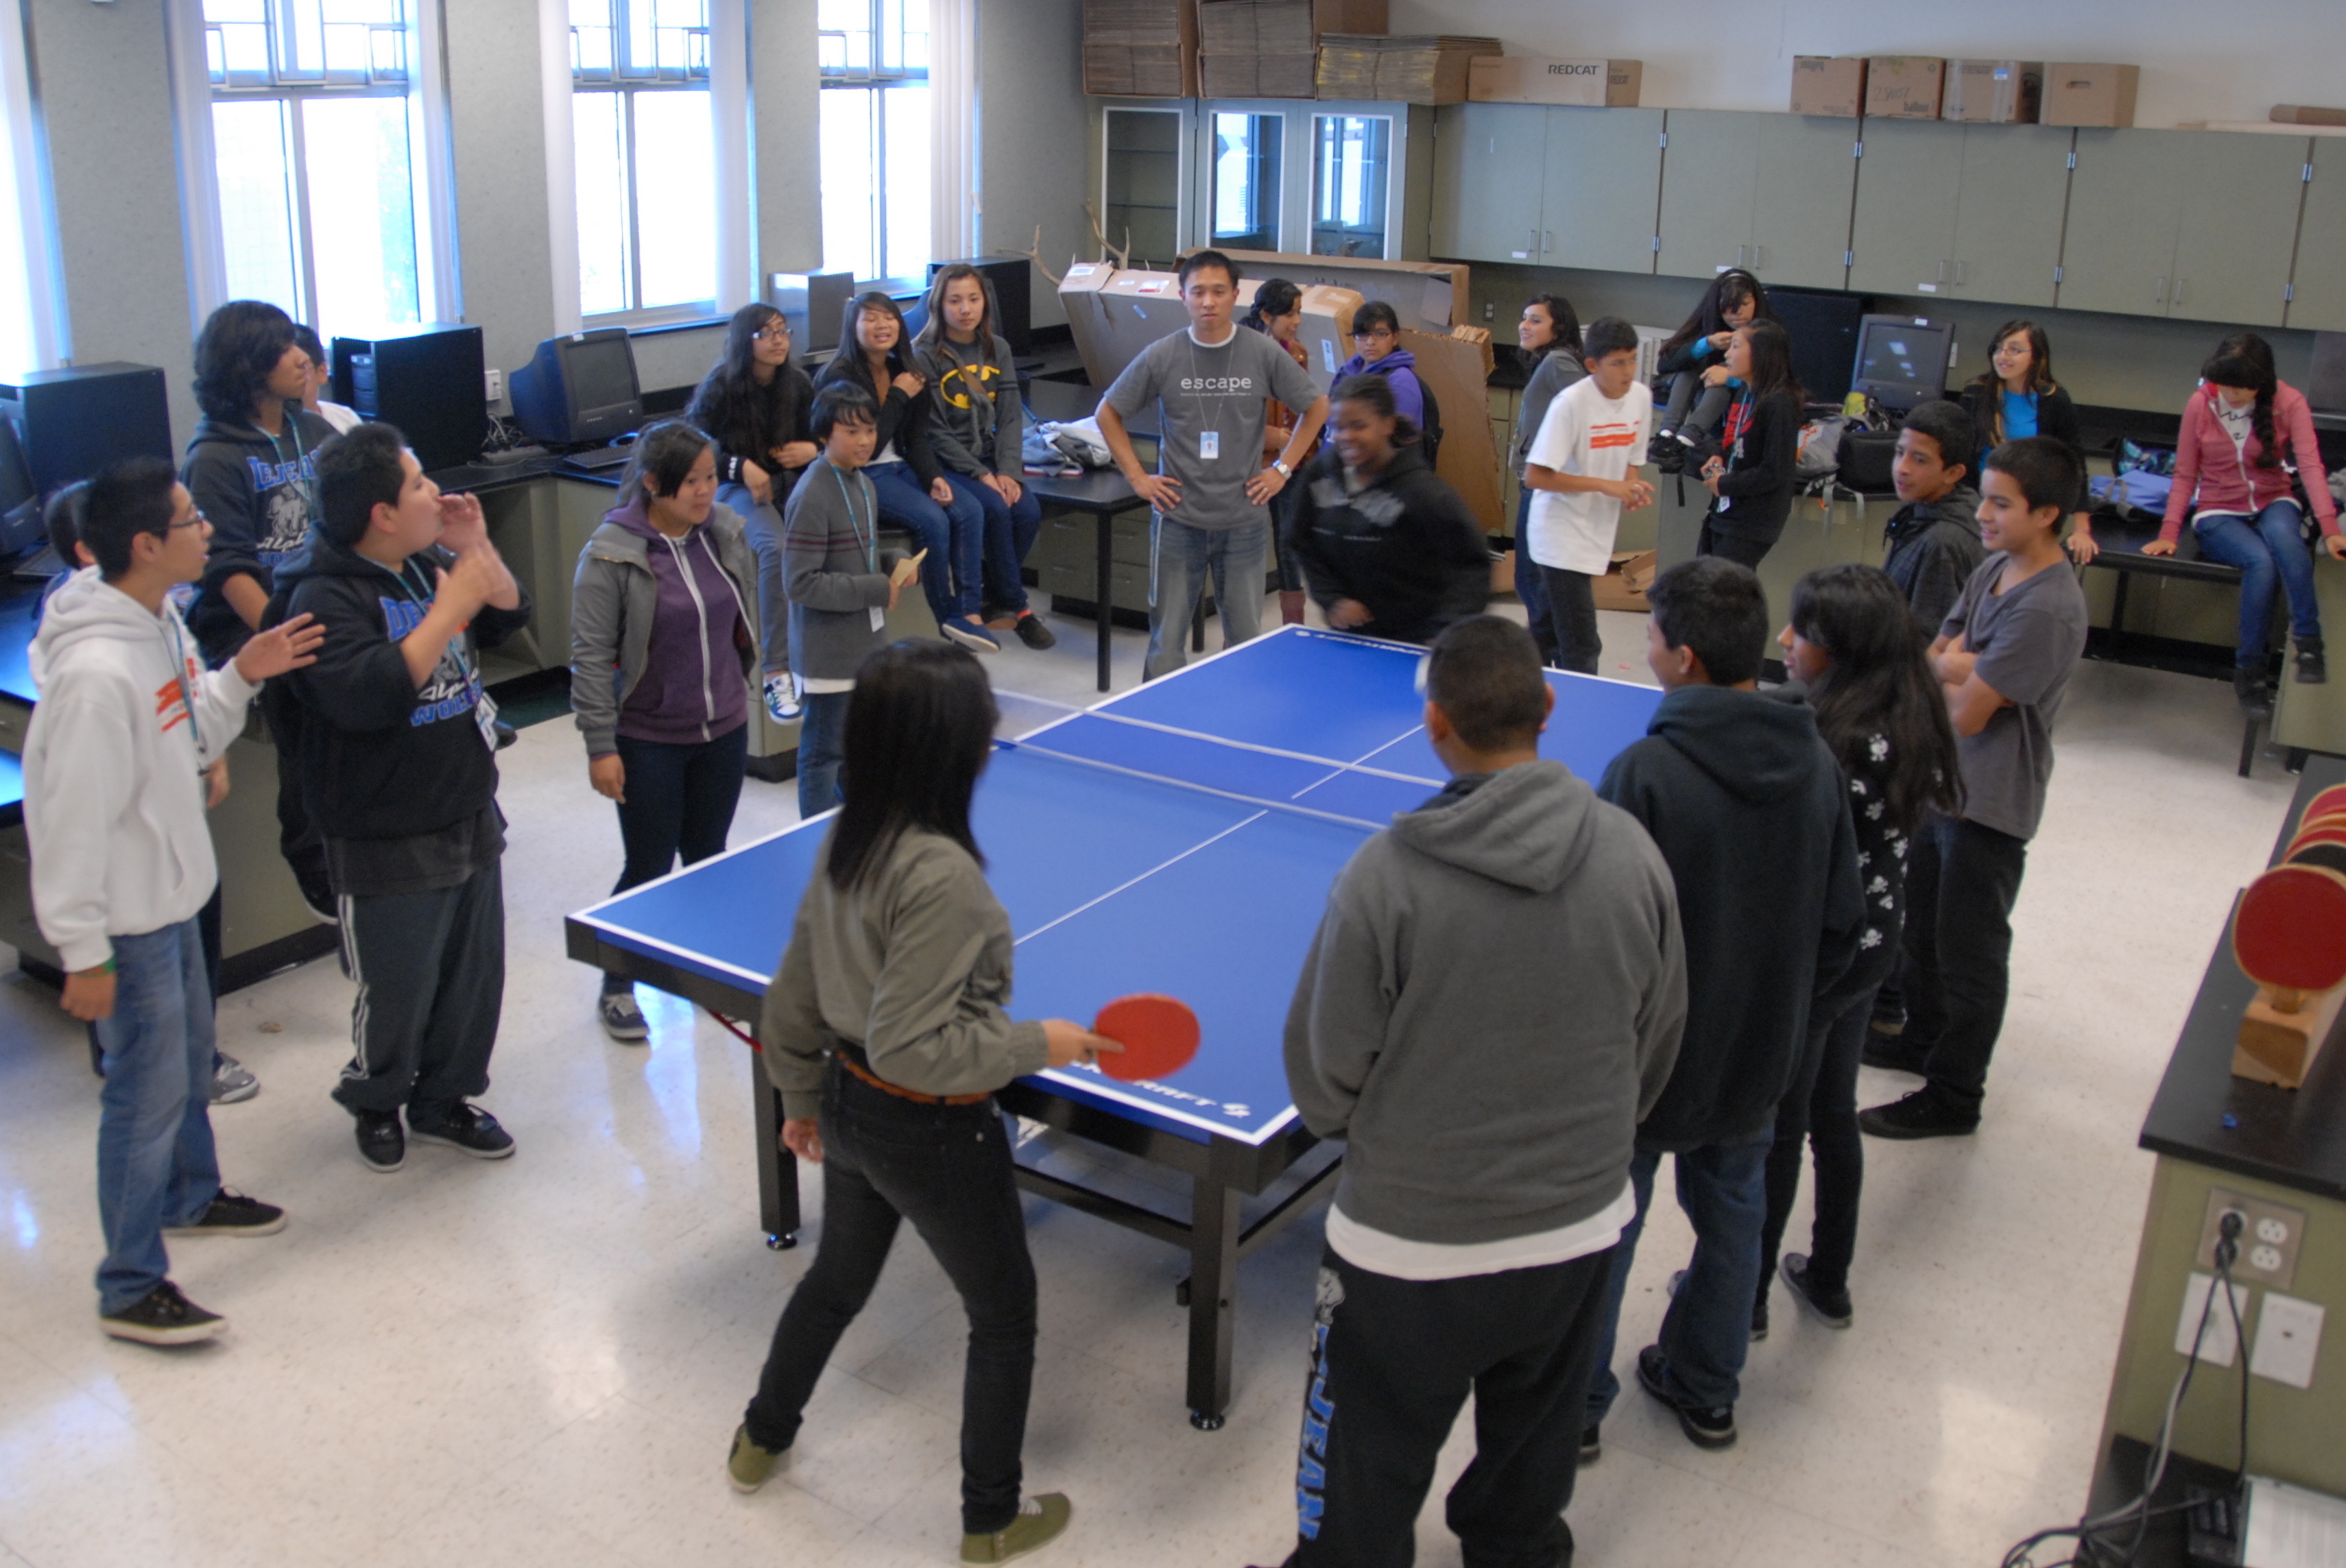 ESCAPE Club students playing ping pong after the meeting.